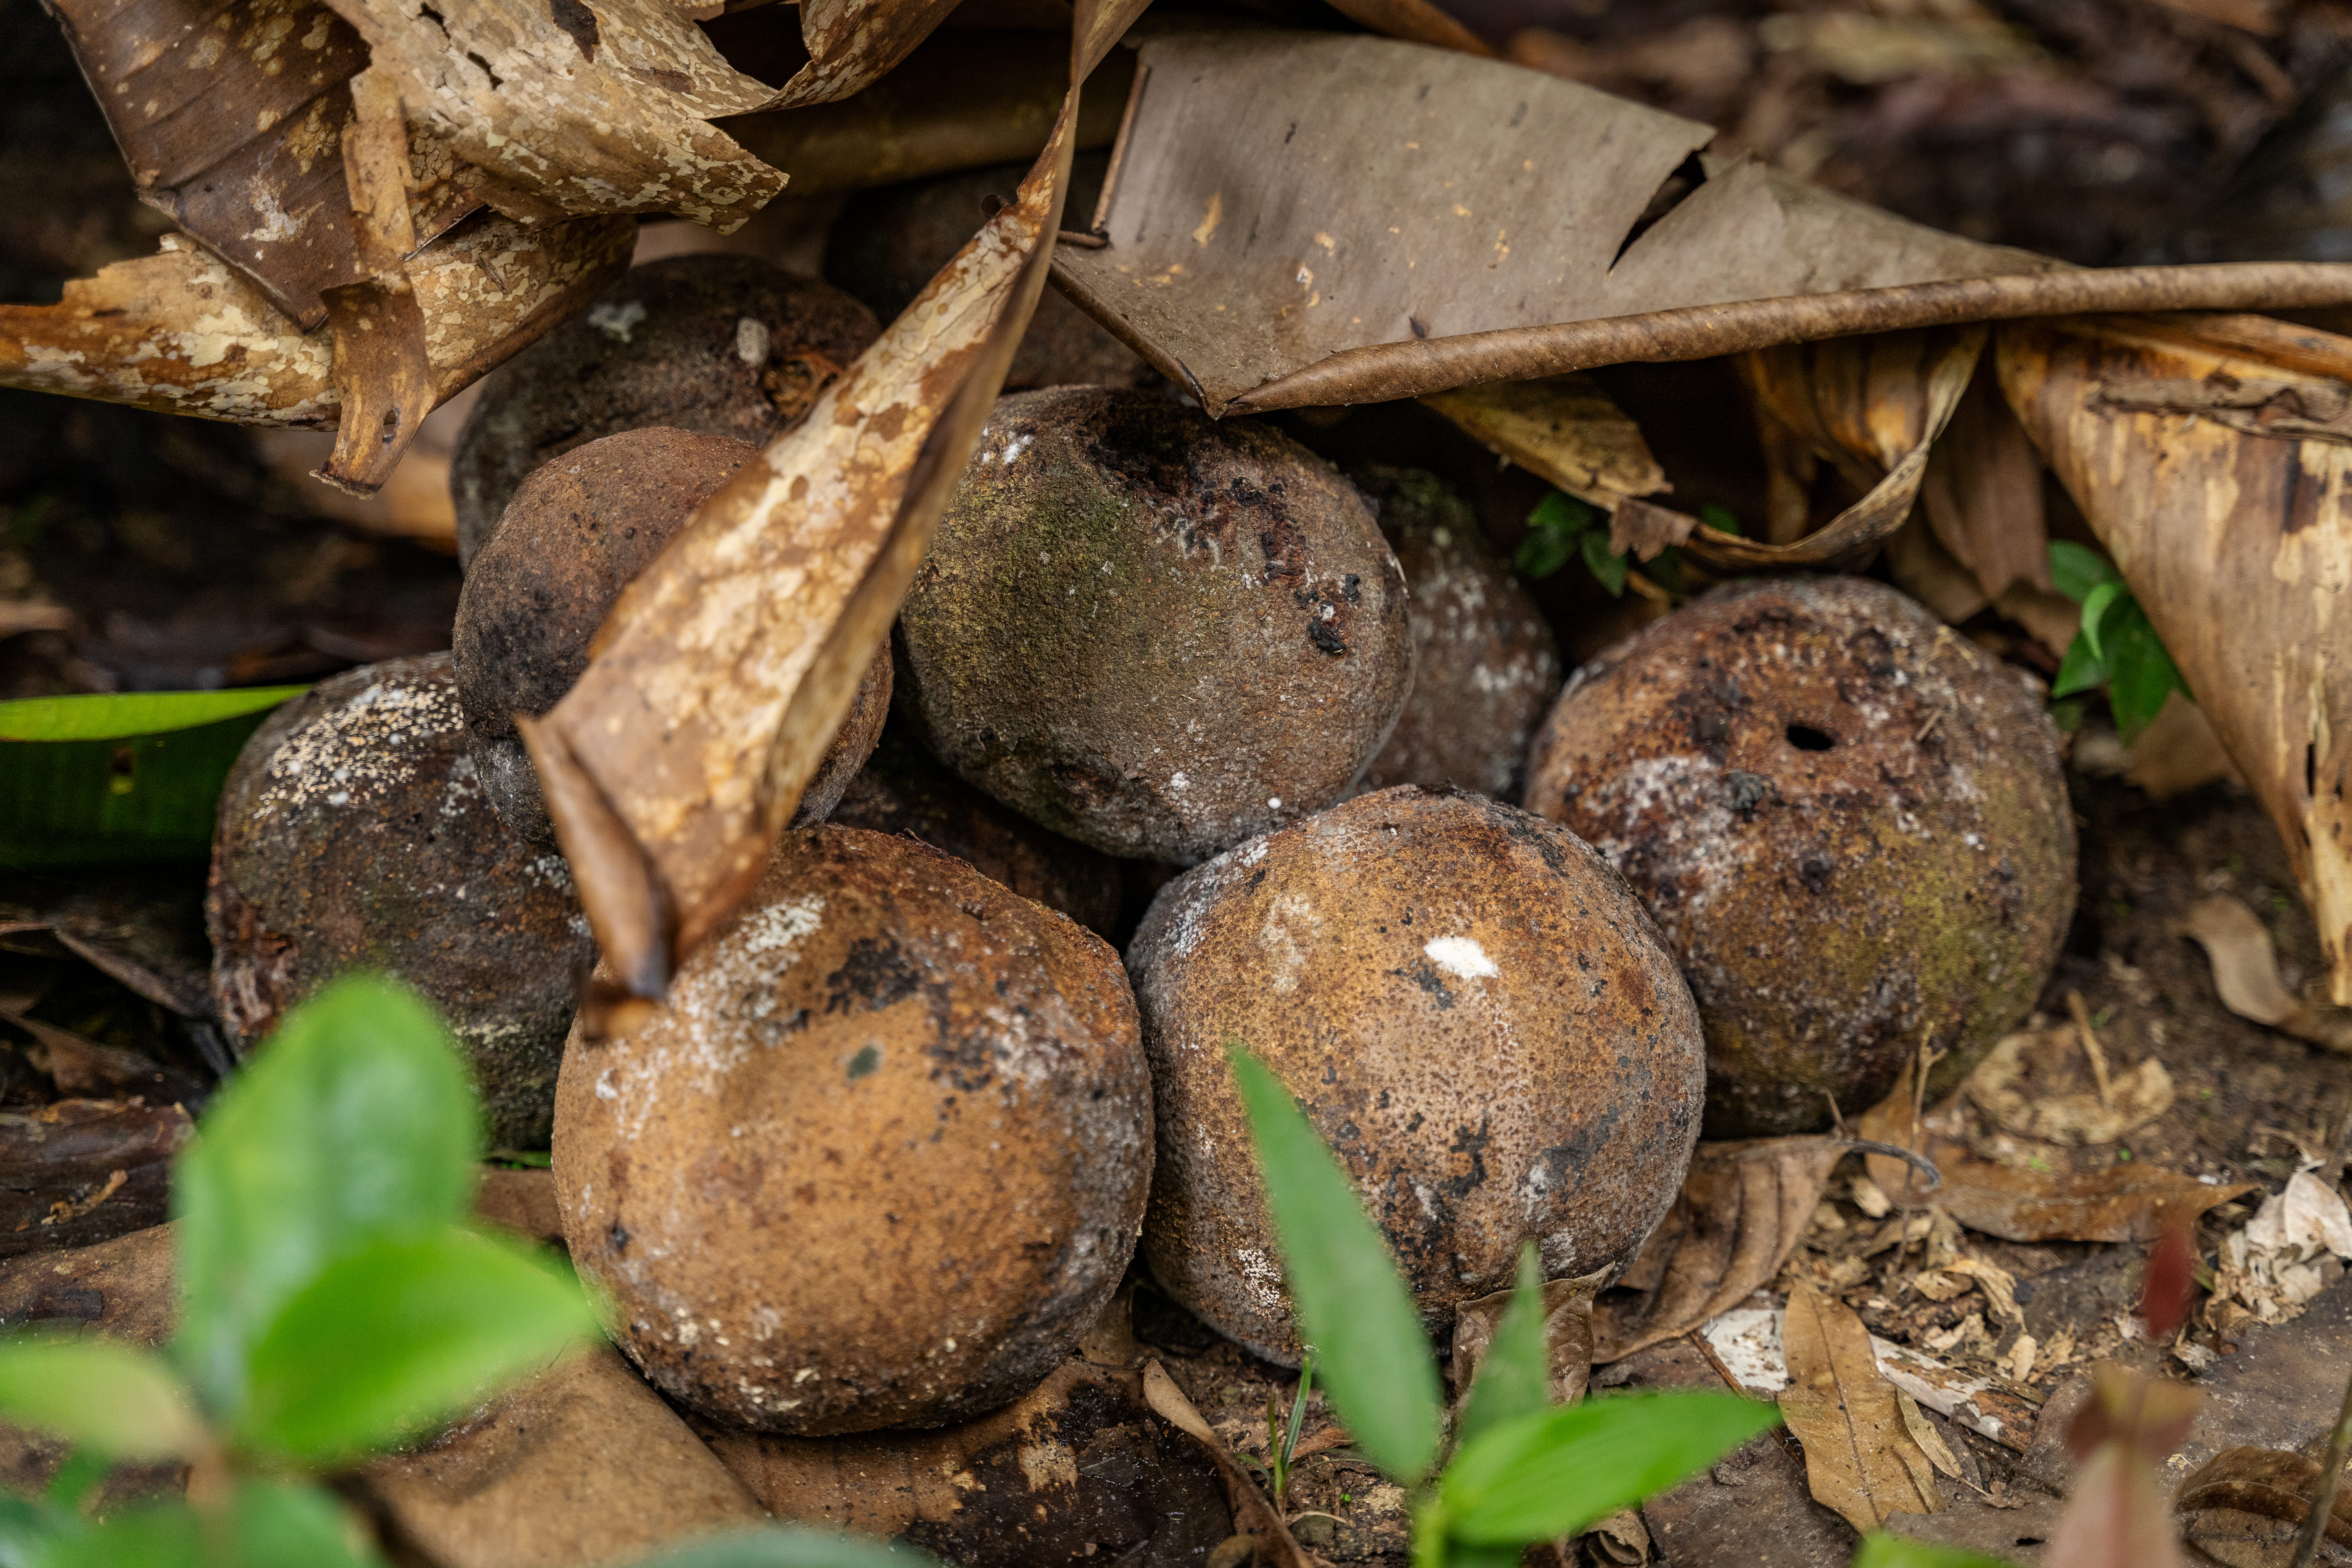 When the Brazil nut fruits are ripe, they fall to the ground...